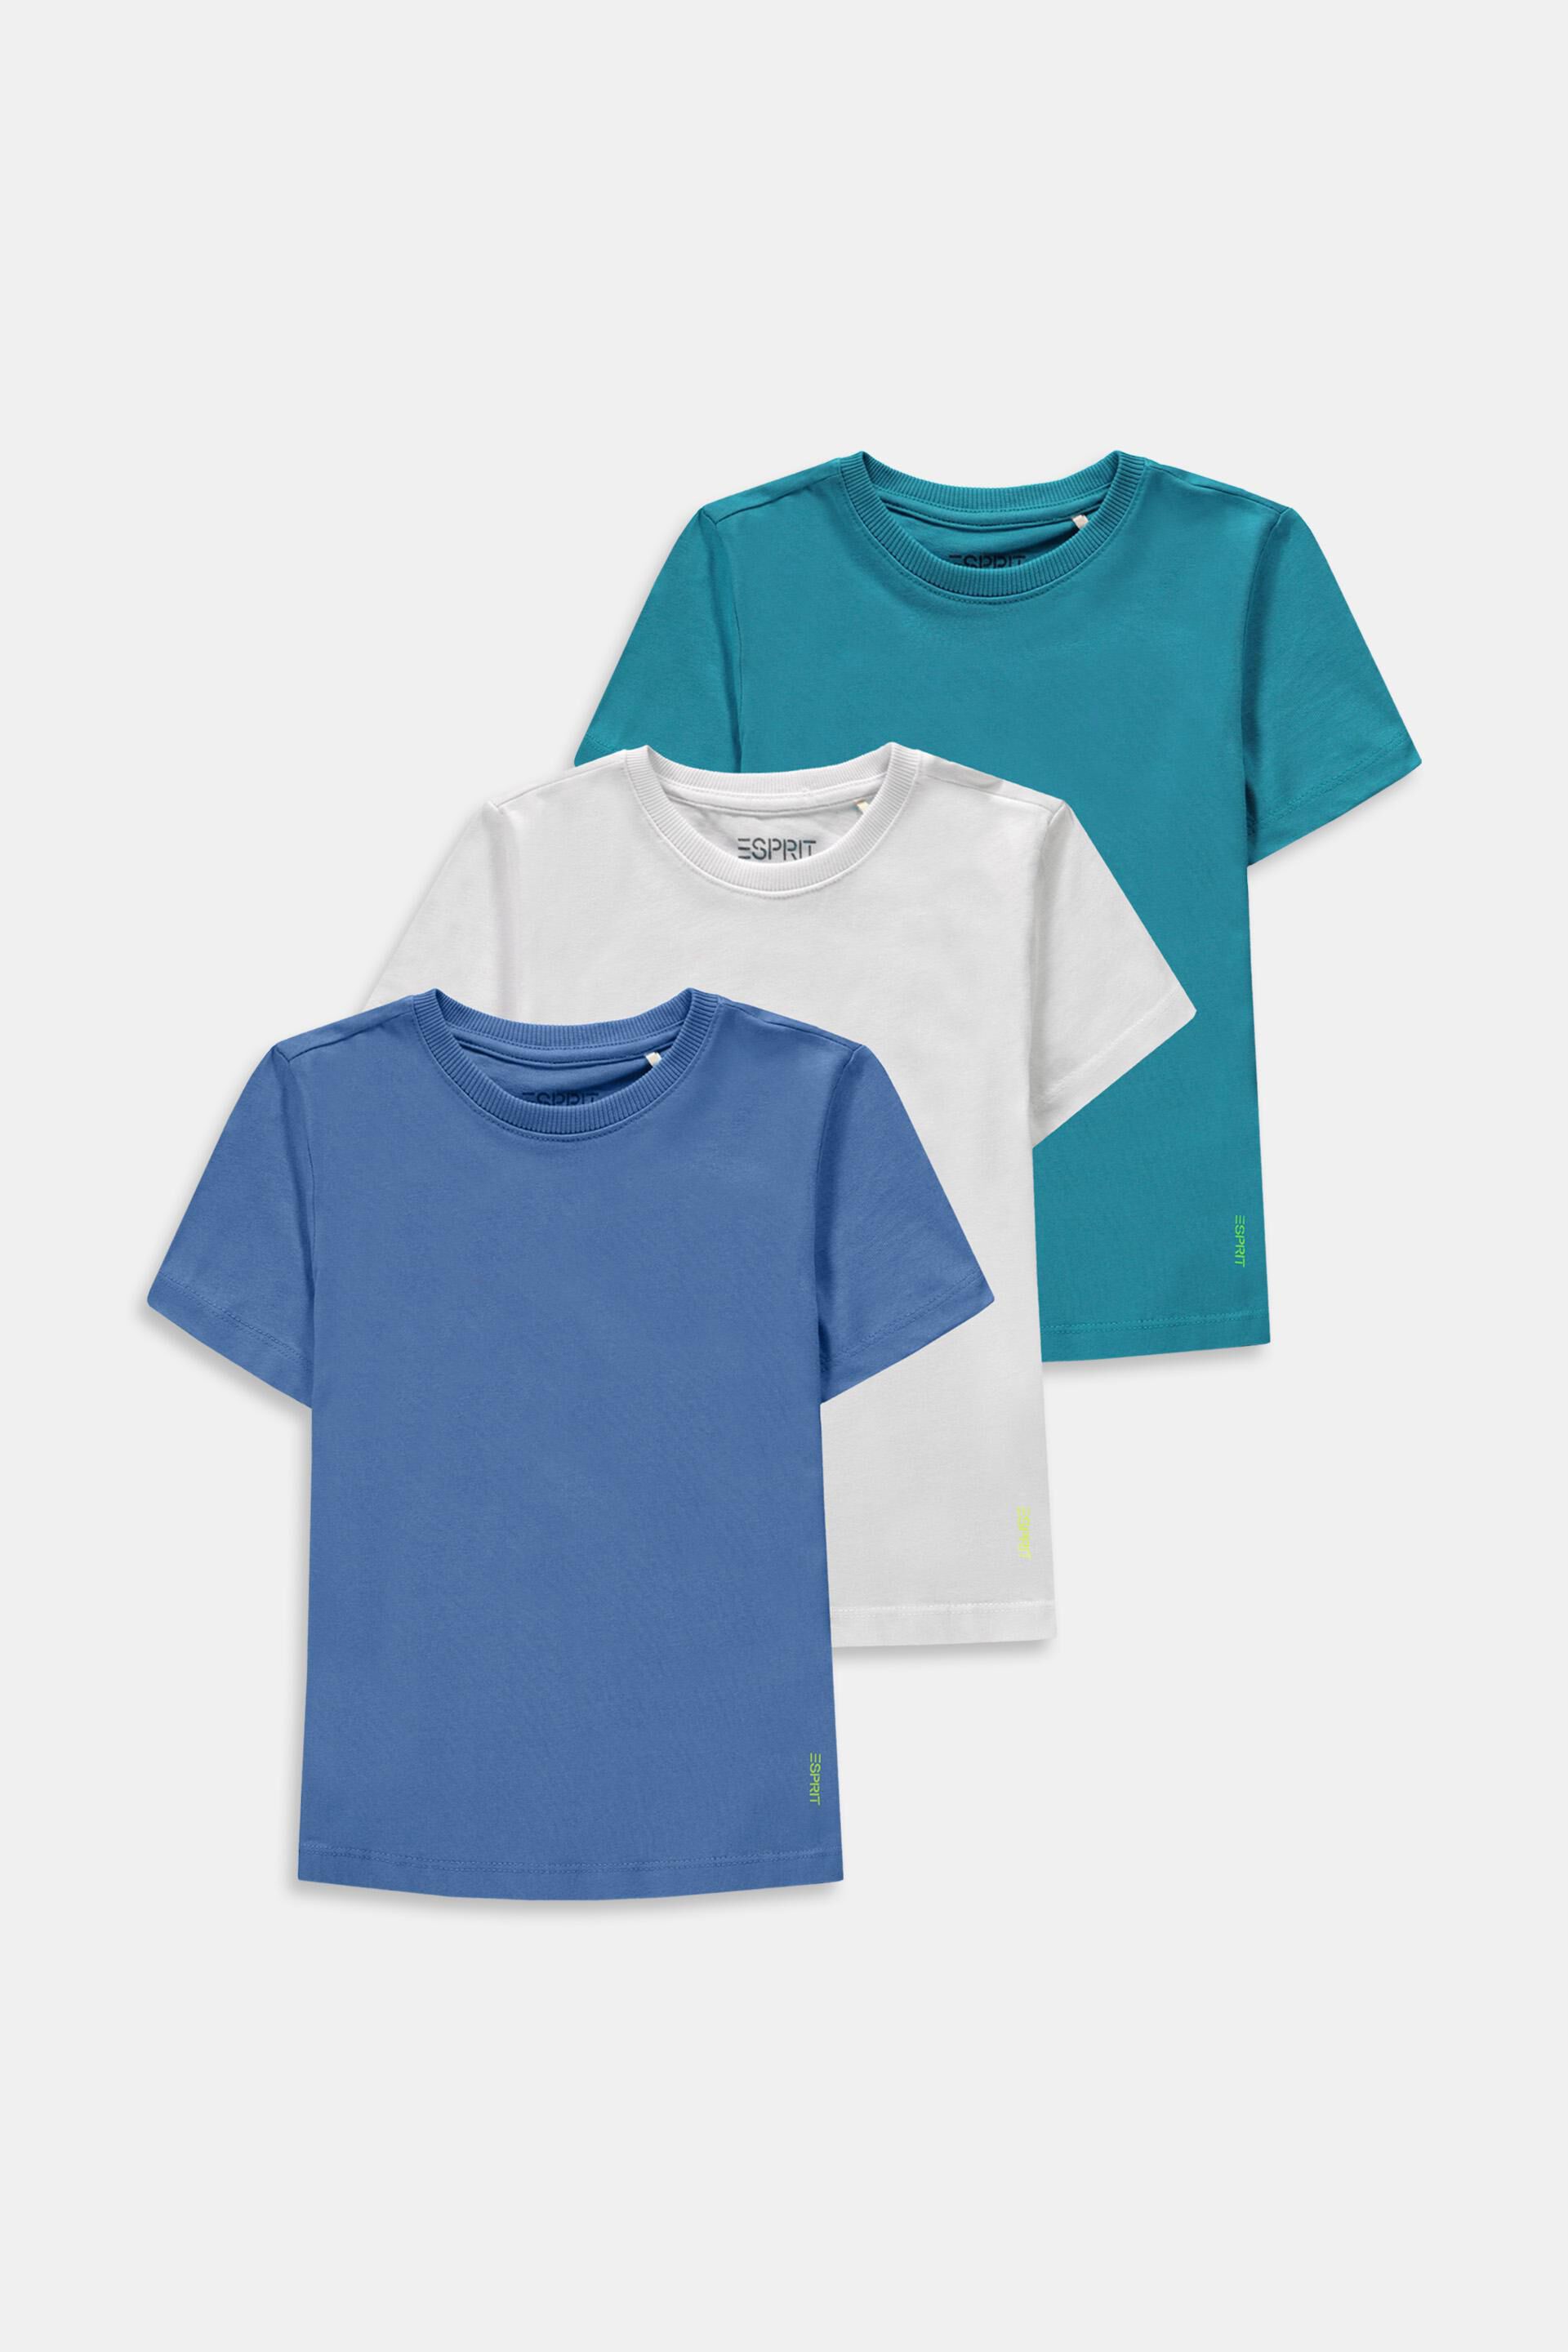 Edc By Esprit 3-pack of cotton t-shirts